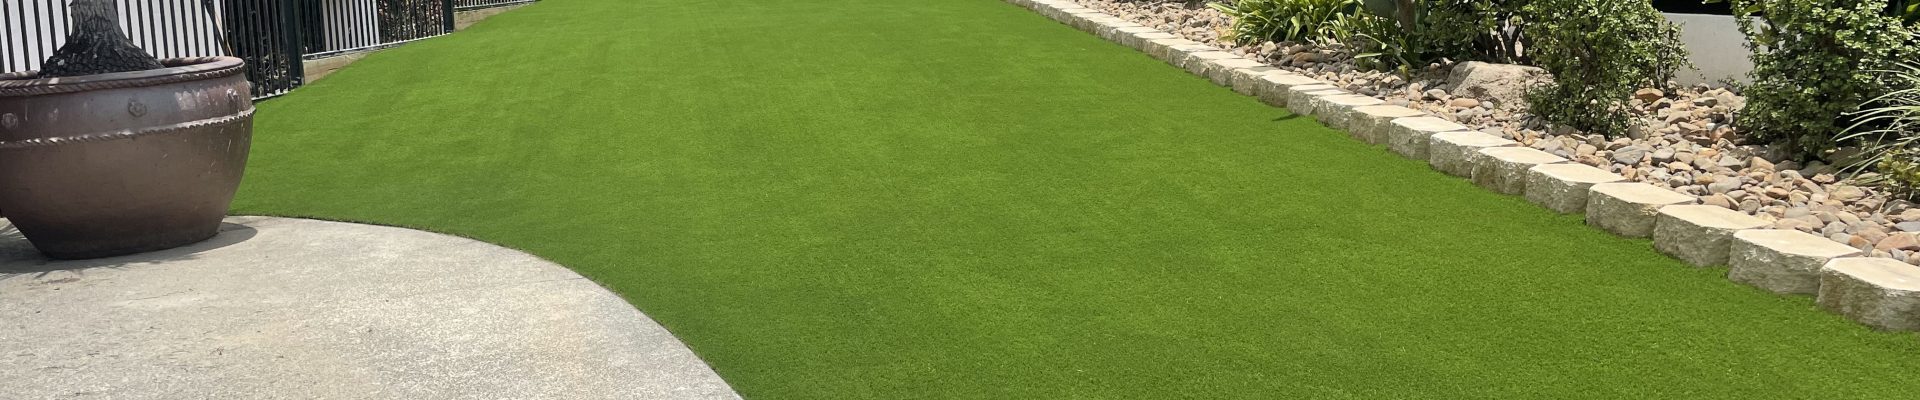 allergy free artificial turf